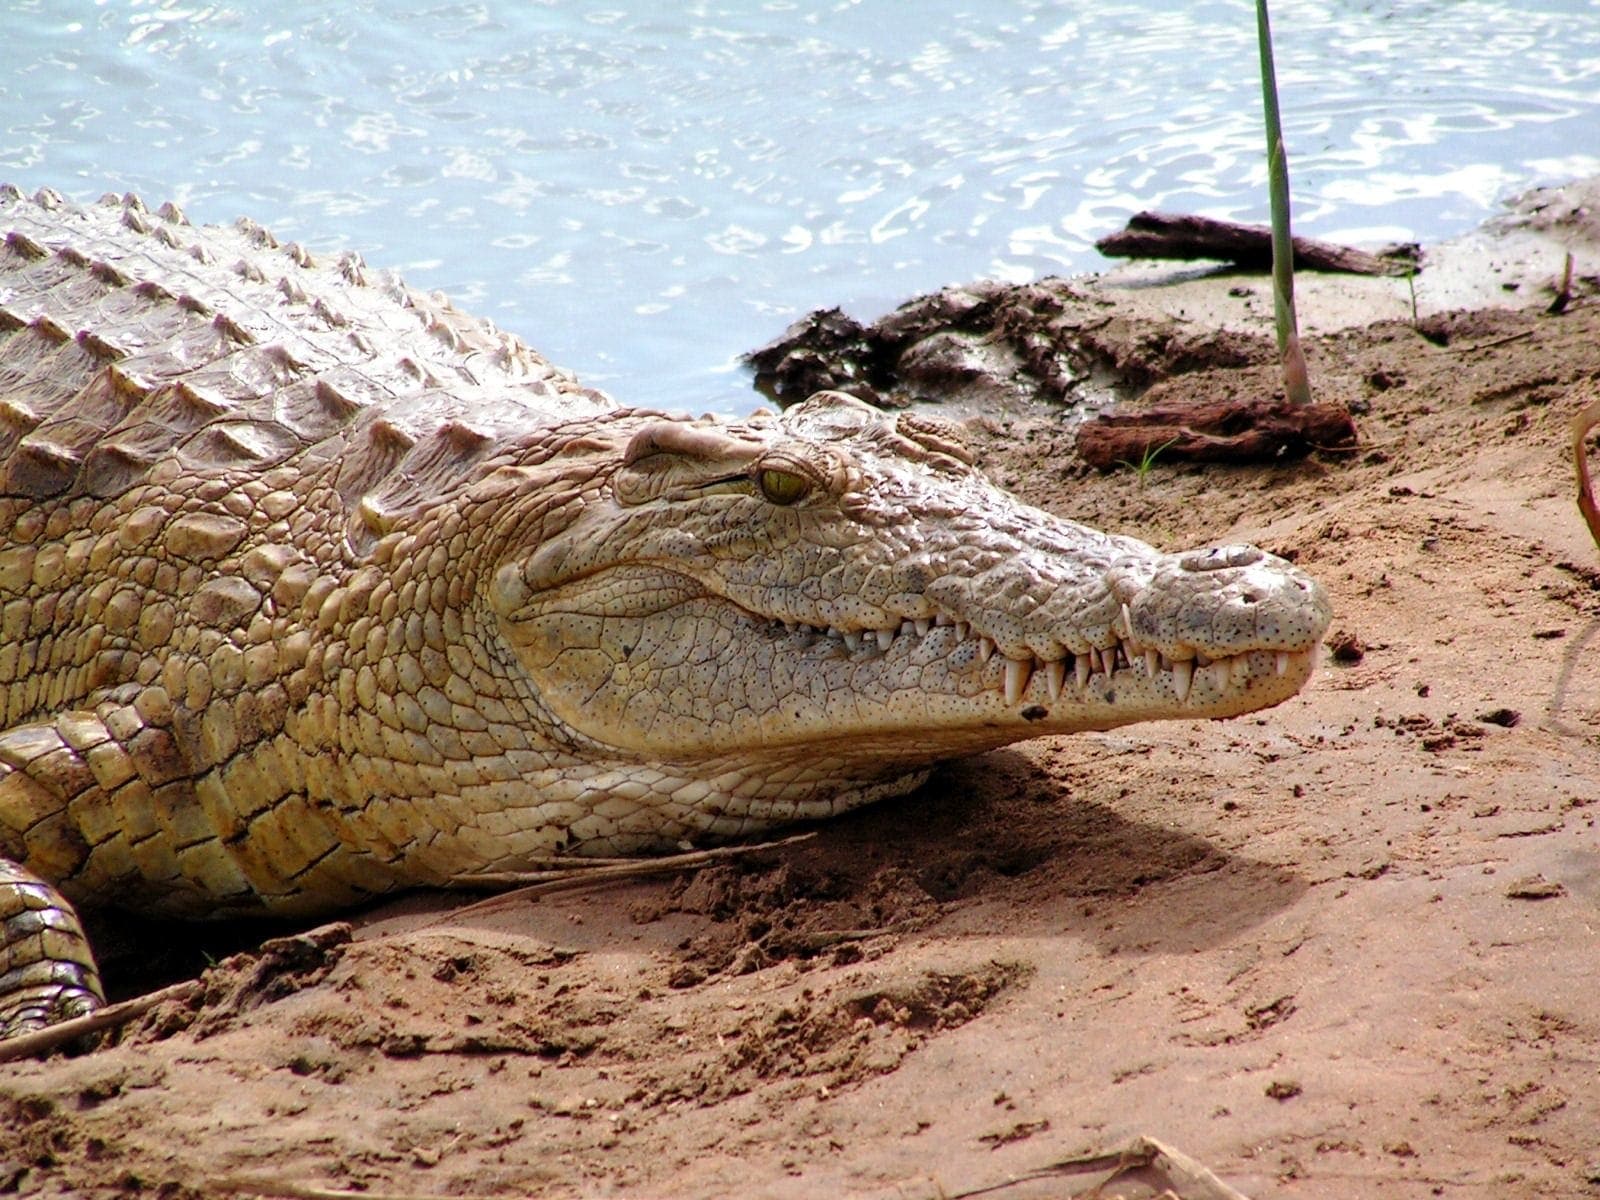 One of nature's toughest predators, crocodiles abound in Zambia's many lakes